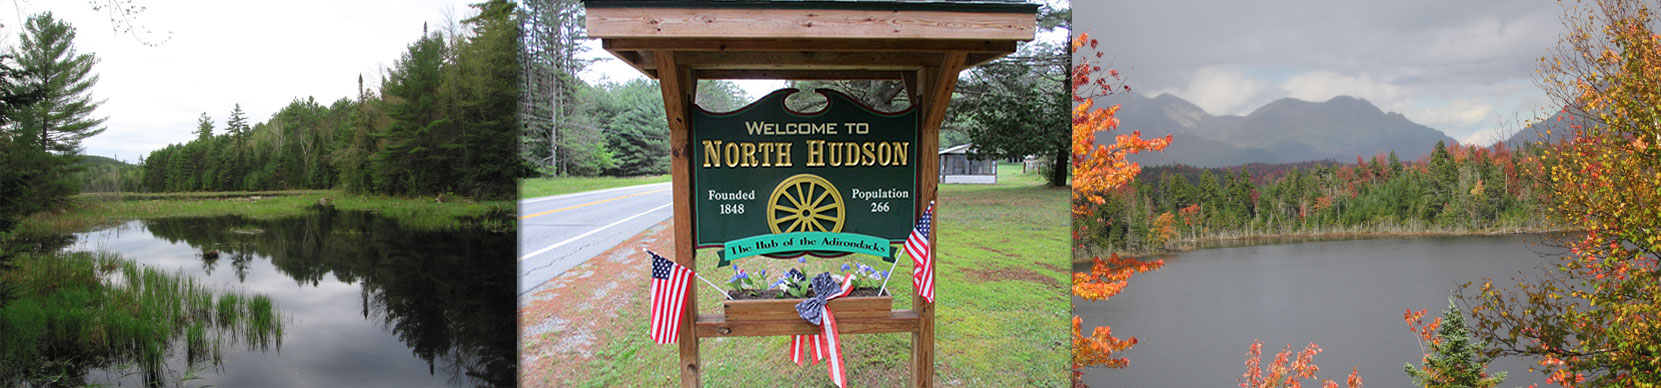 Welcome to North Hudson NY sign - Boreas Pond - East Mill Flow, Round, Trout